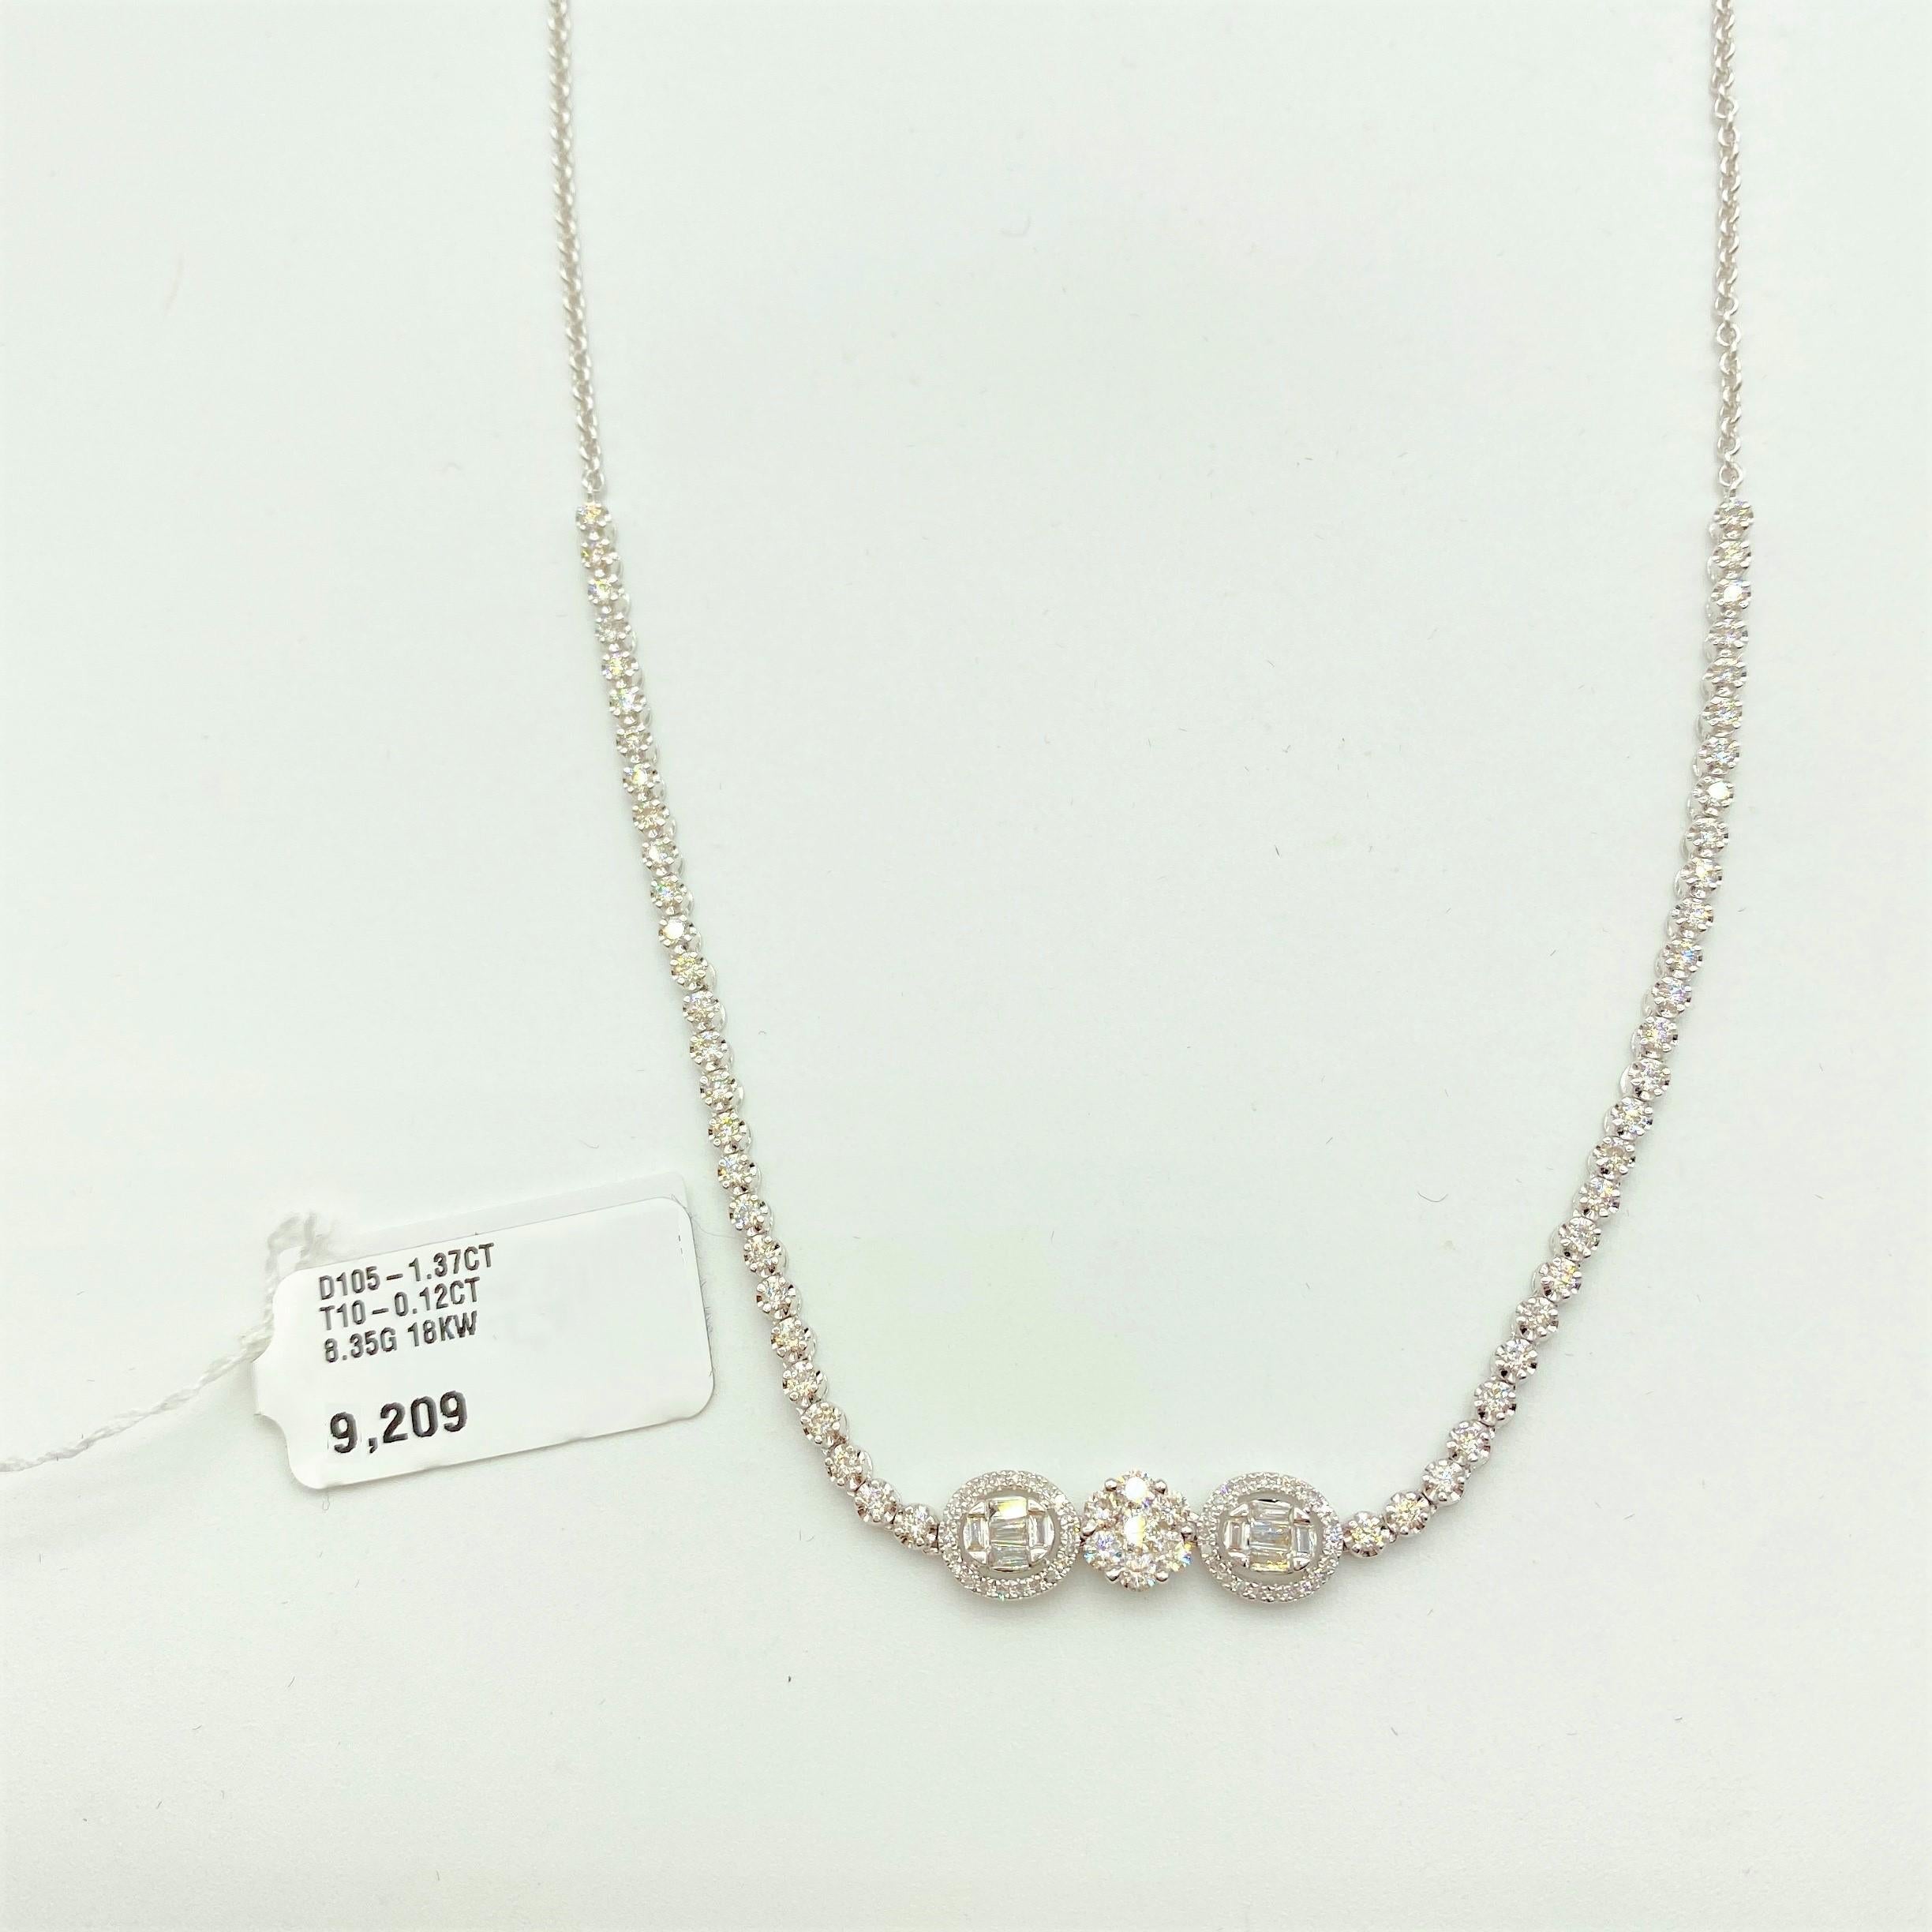 Mixed Cut NWT $9, 209 18kt Gold Rare Magnificent Glittering Diamond Choker Necklace For Sale